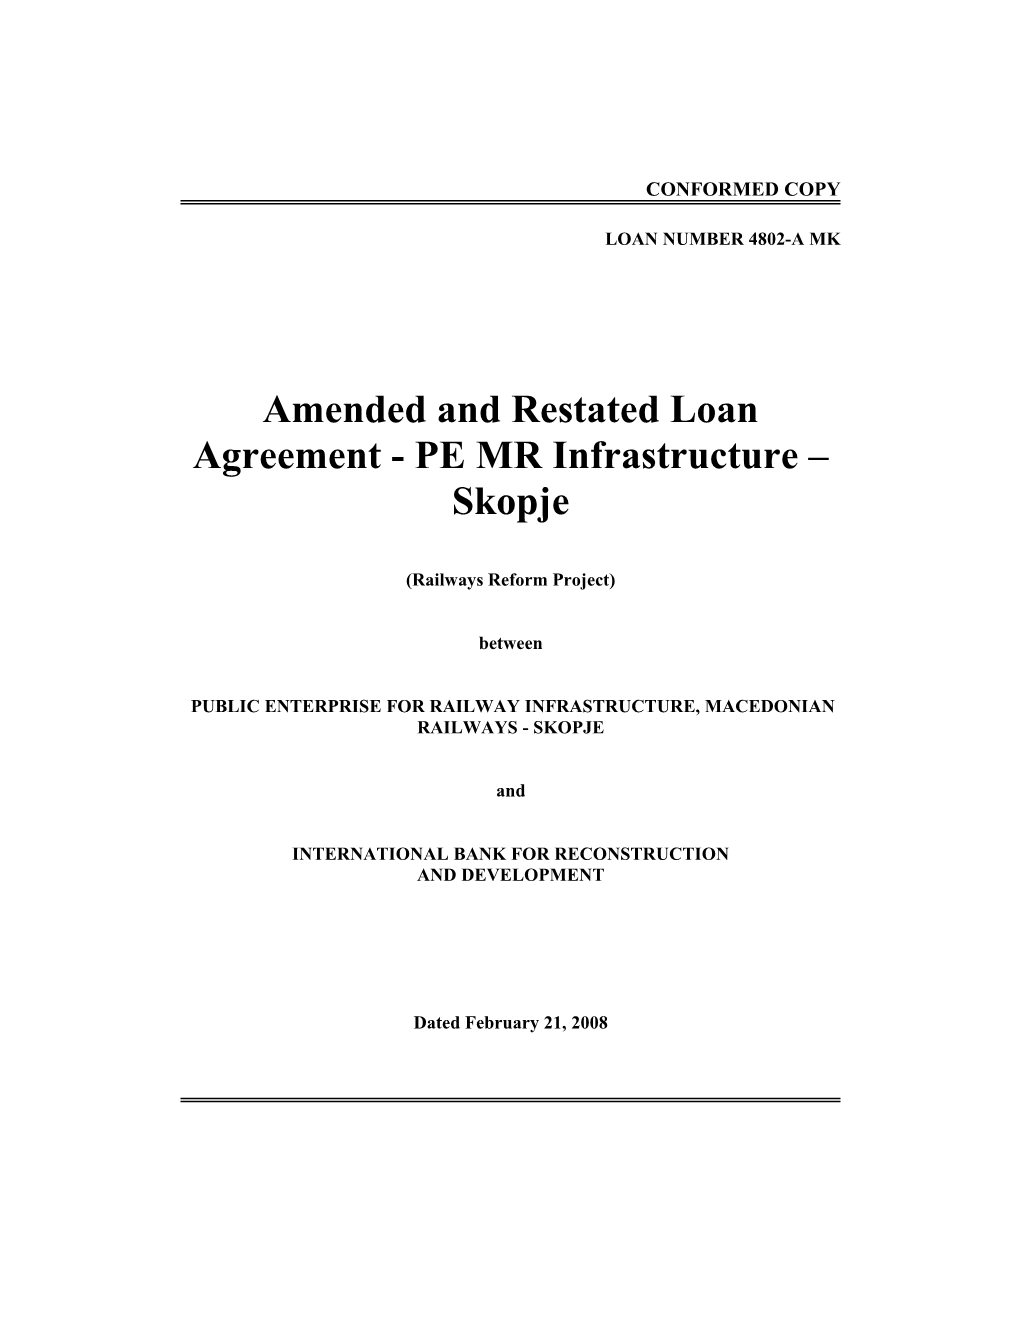 Amended and Restated Loan Agreement - PE MR Infrastructure Skopje